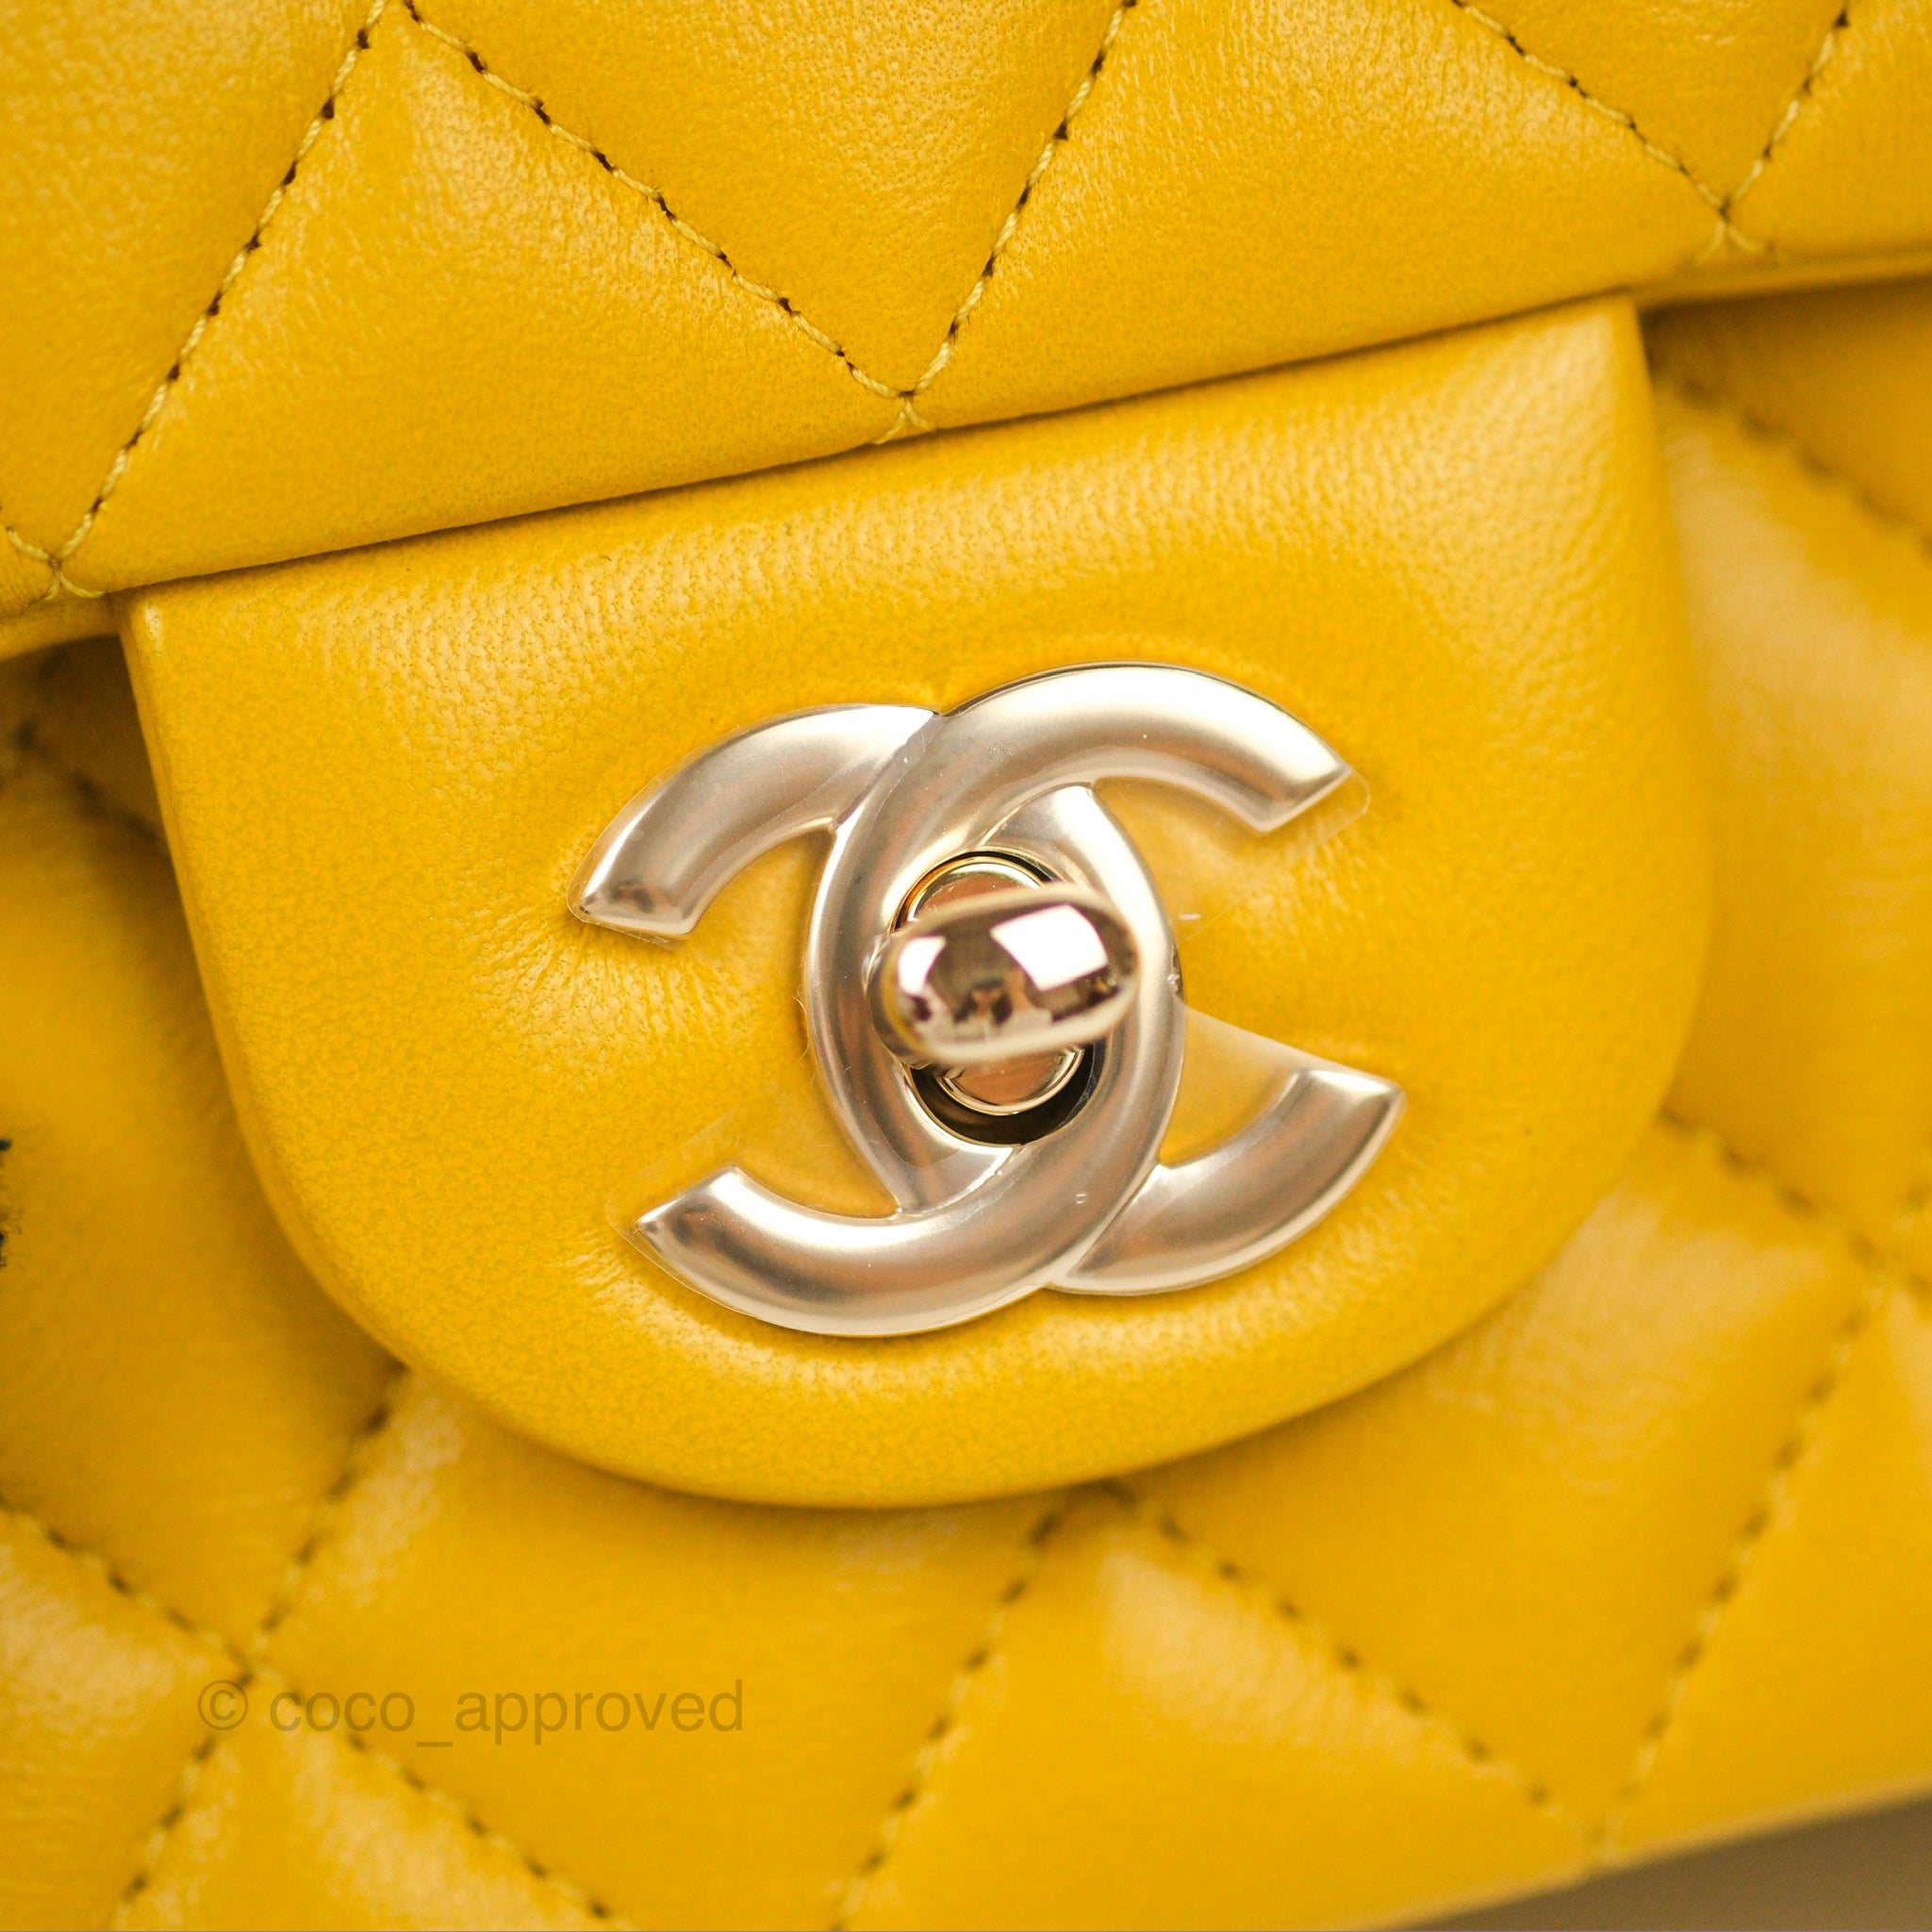 Chanel Champagne Gold Iridescent Quilted Leather Extra Mini